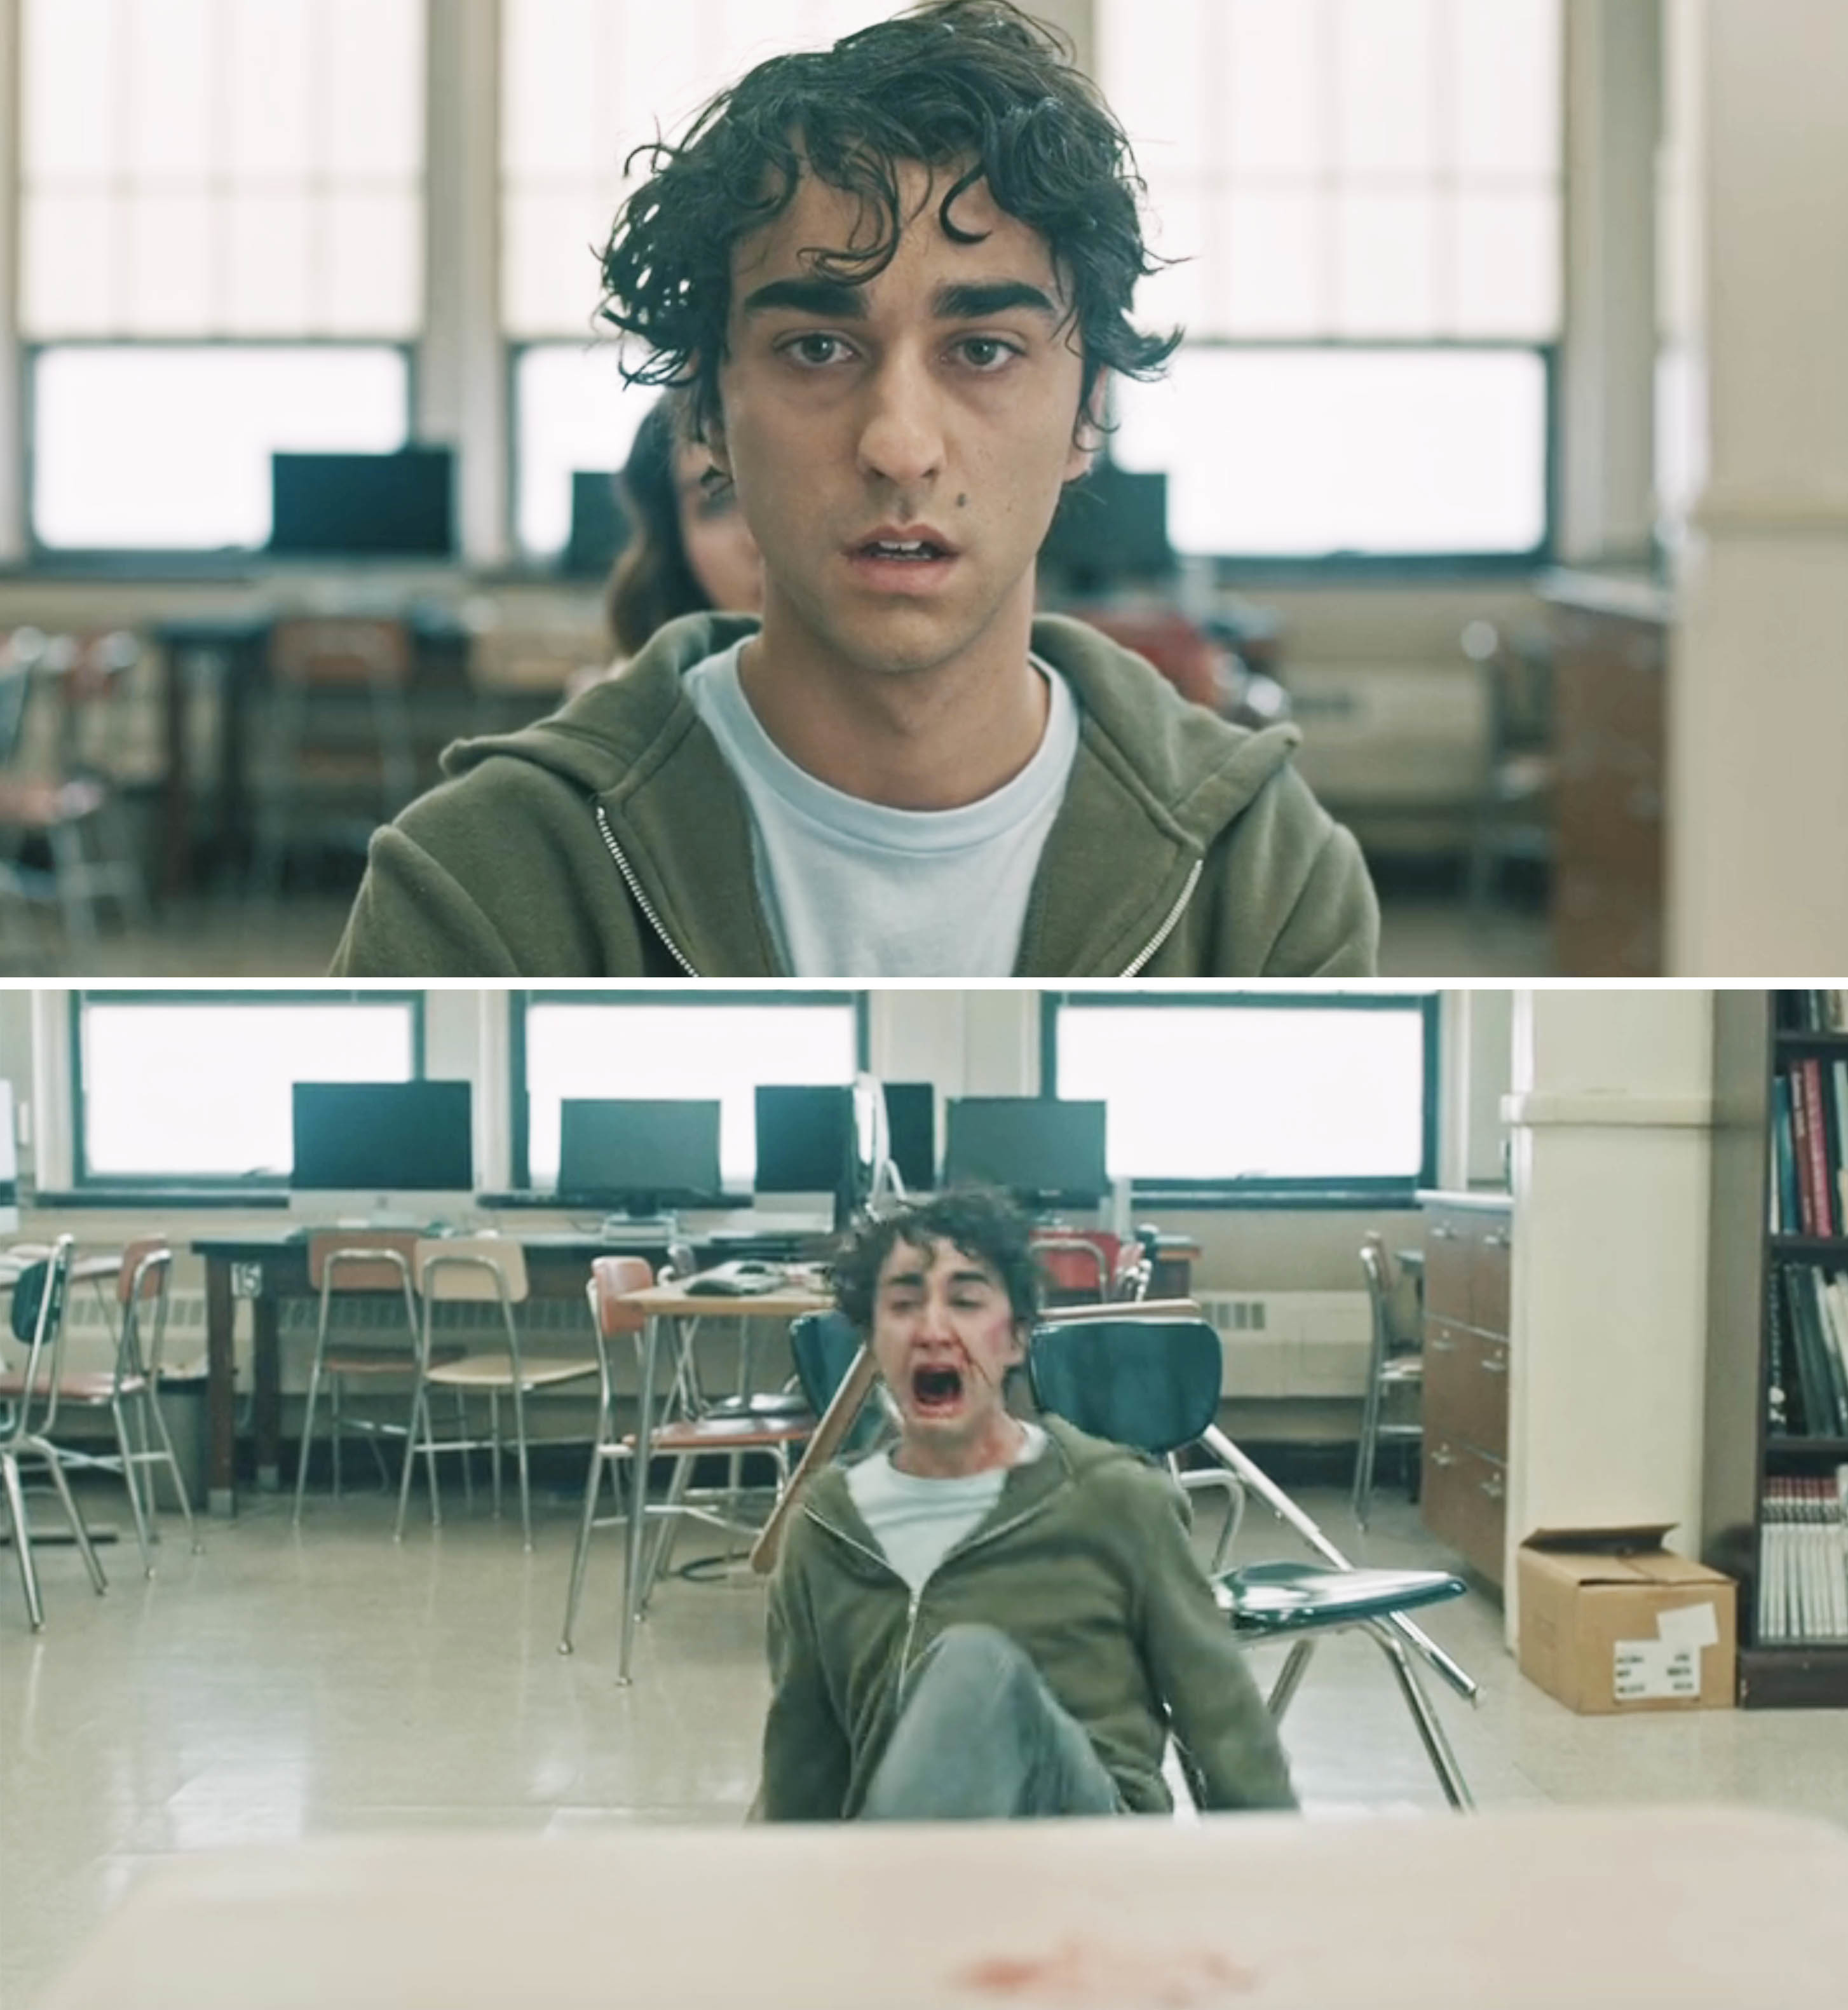 Two scenes of actor Alex Wolff as Peter in the movie &quot;Hereditary&quot; expressing shock and distress in a classroom